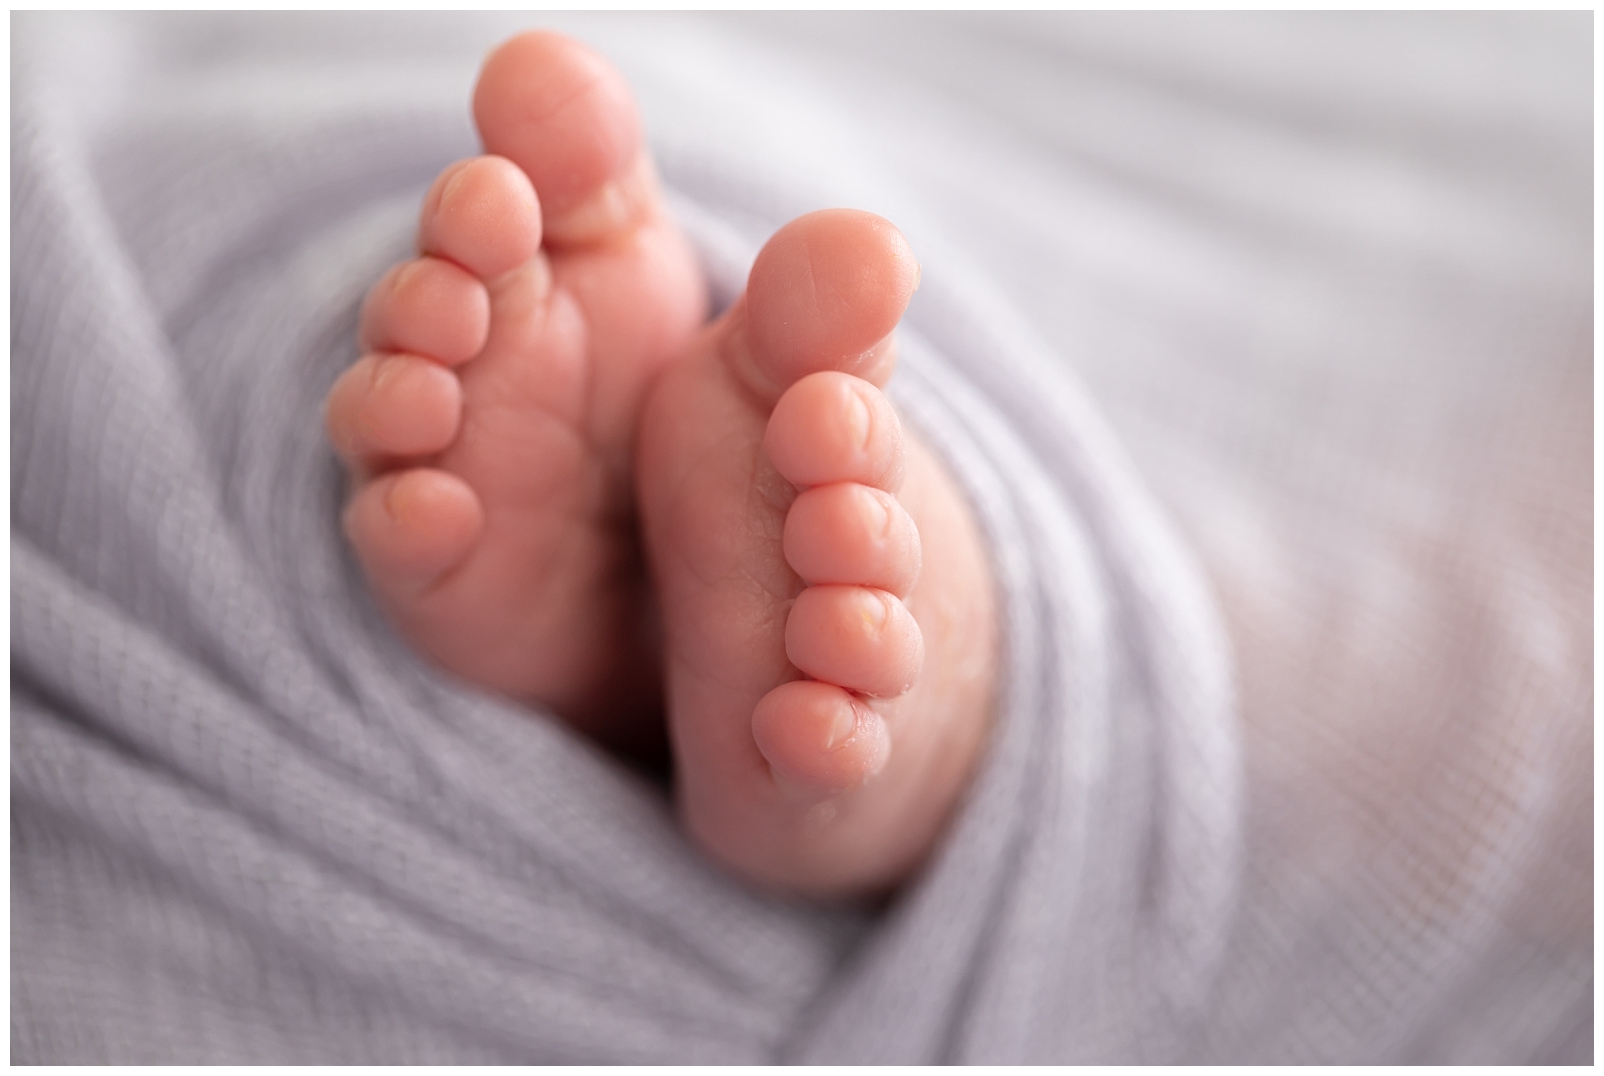 newborn baby feet and toes